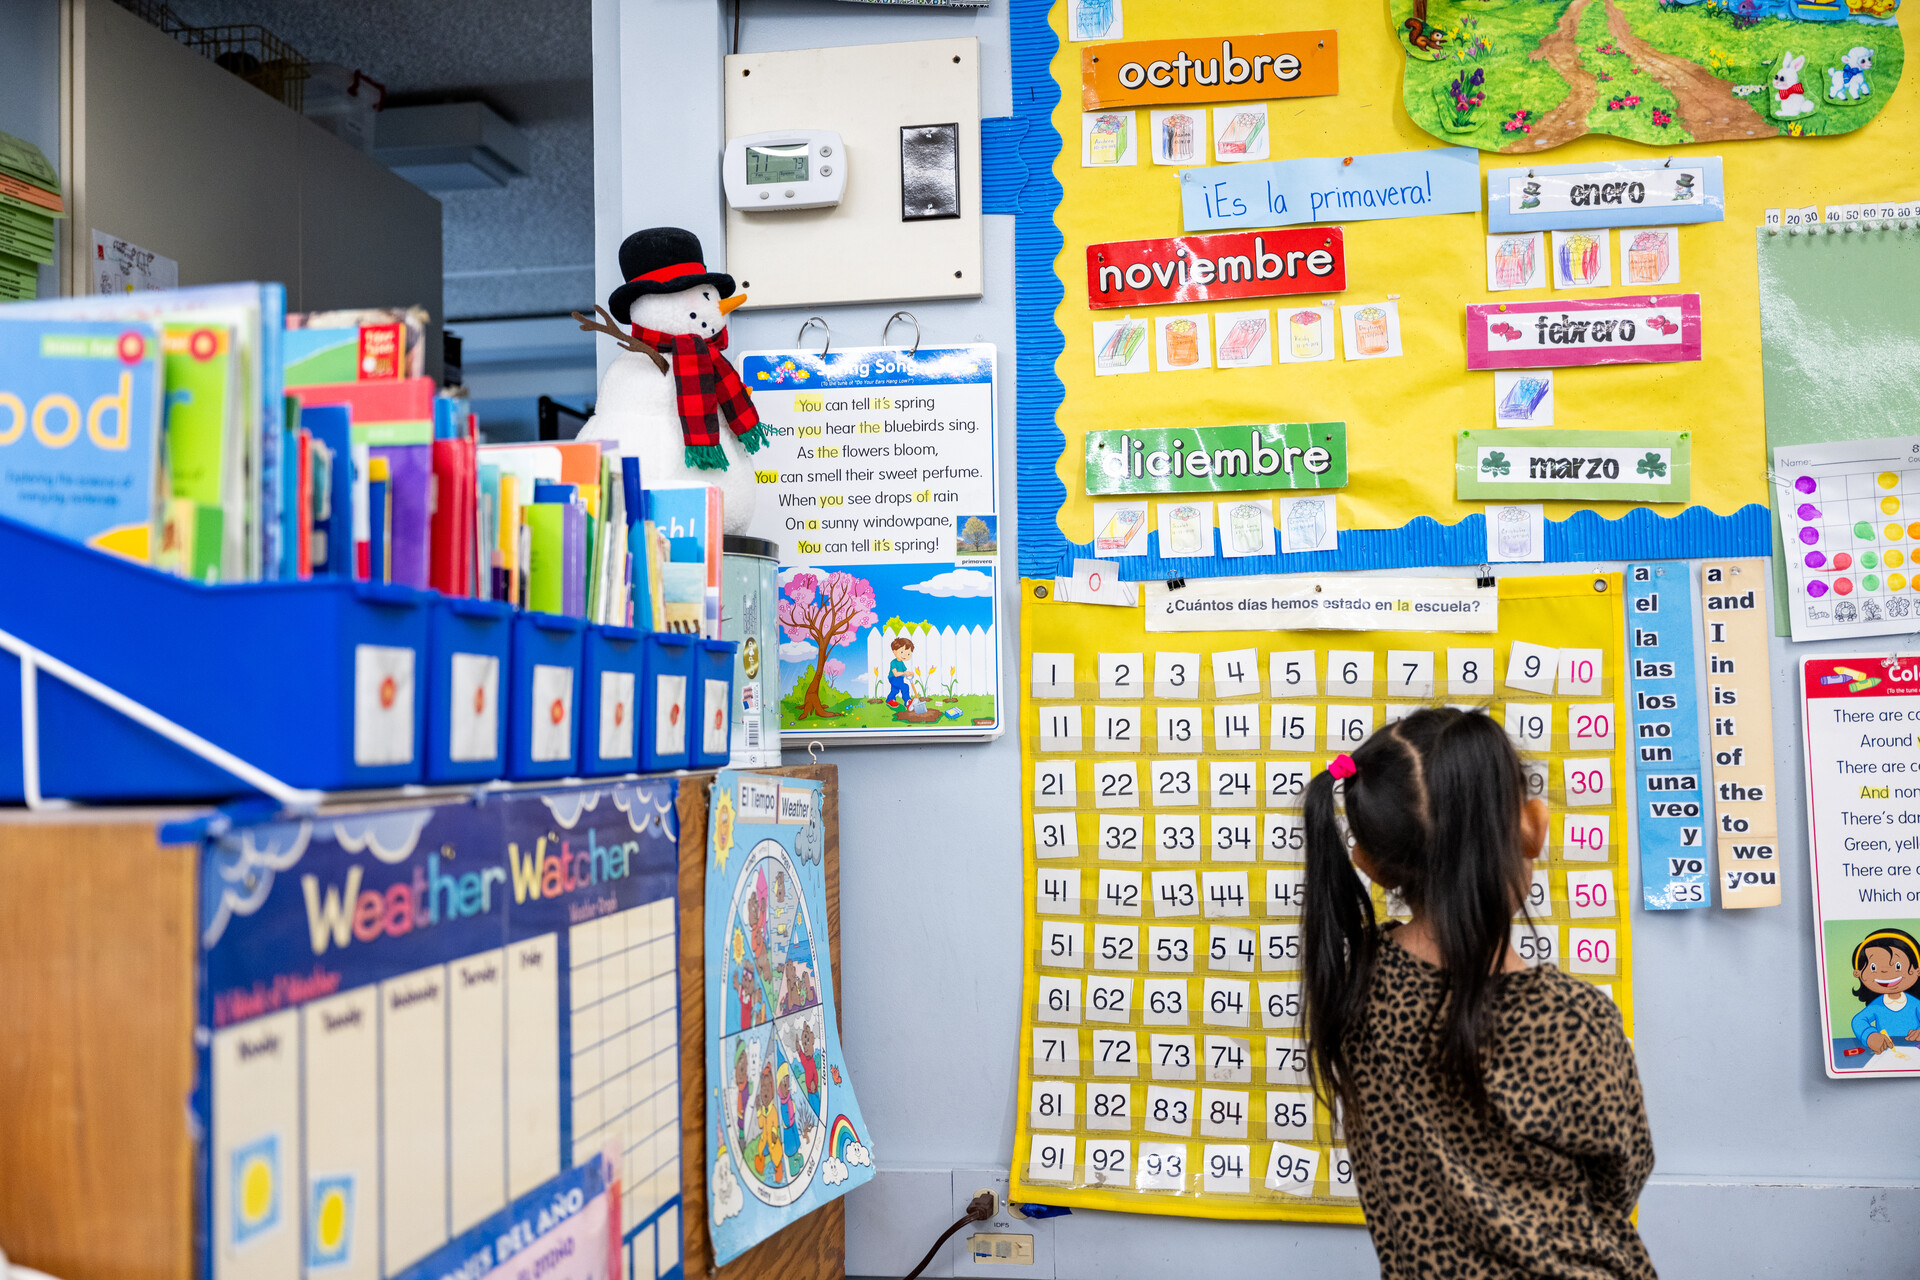 A young girl looks at a bilingual calendar on a classroom wall